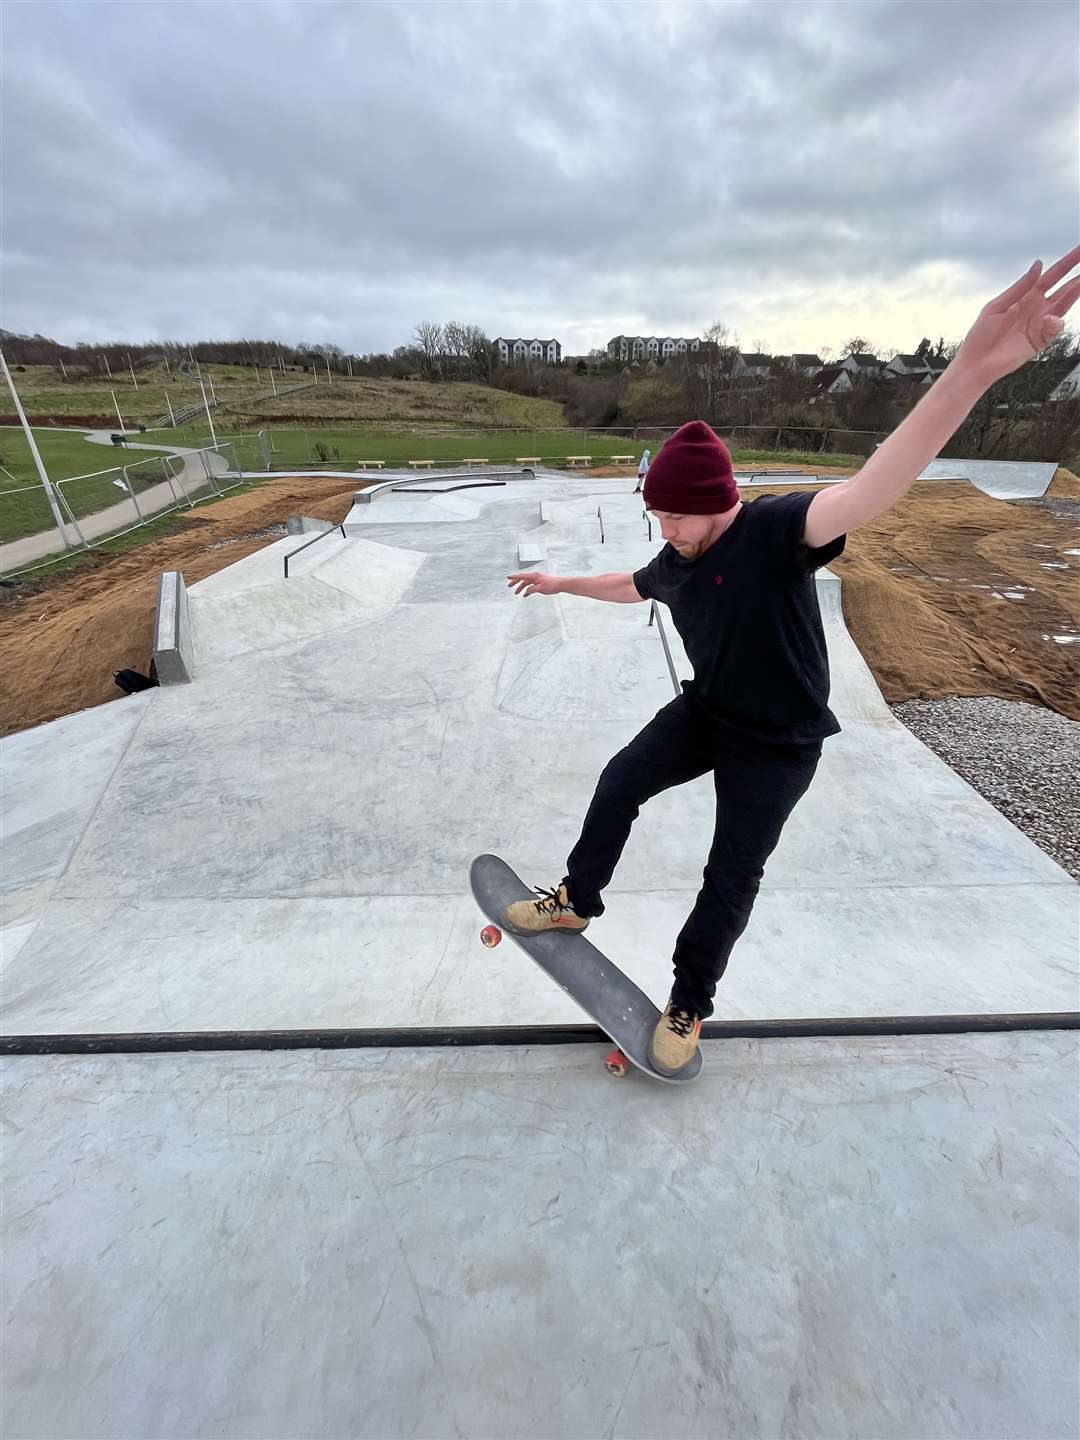 The skate park was officially opened on Thursday. Picture supplied.